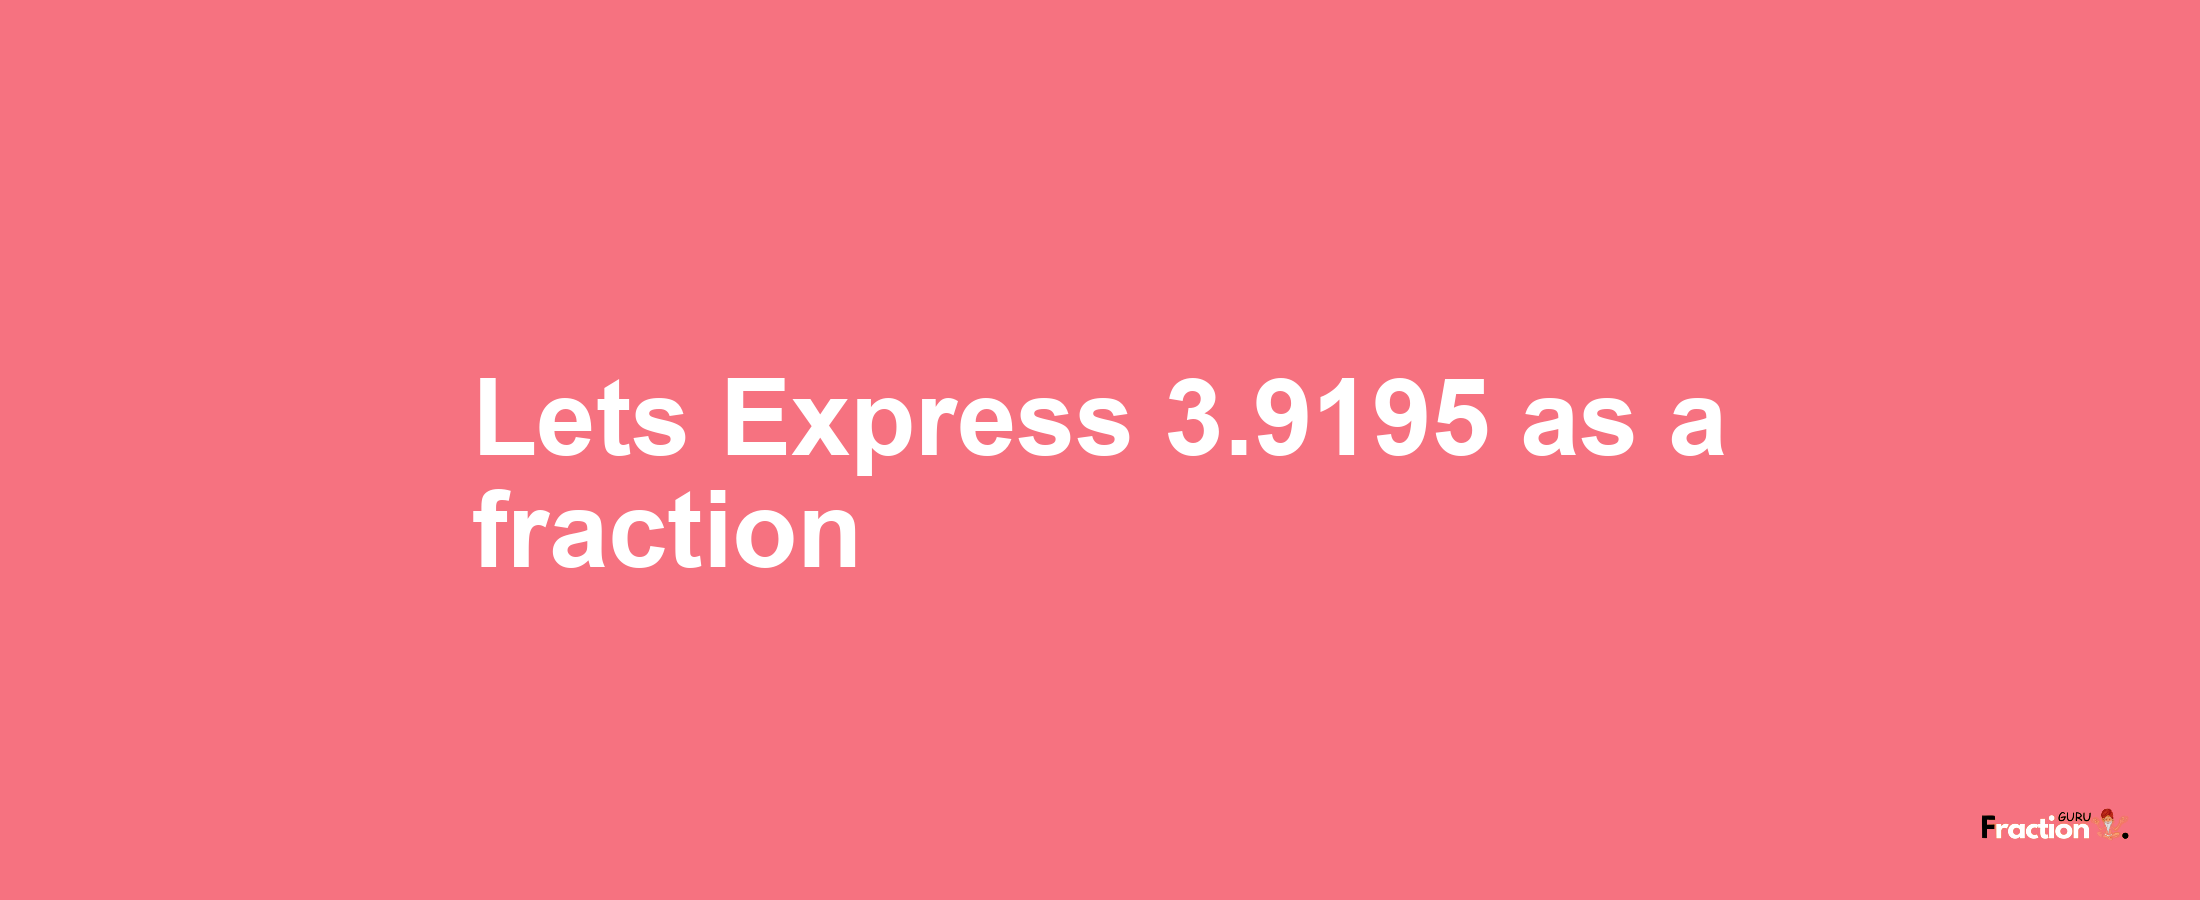 Lets Express 3.9195 as afraction